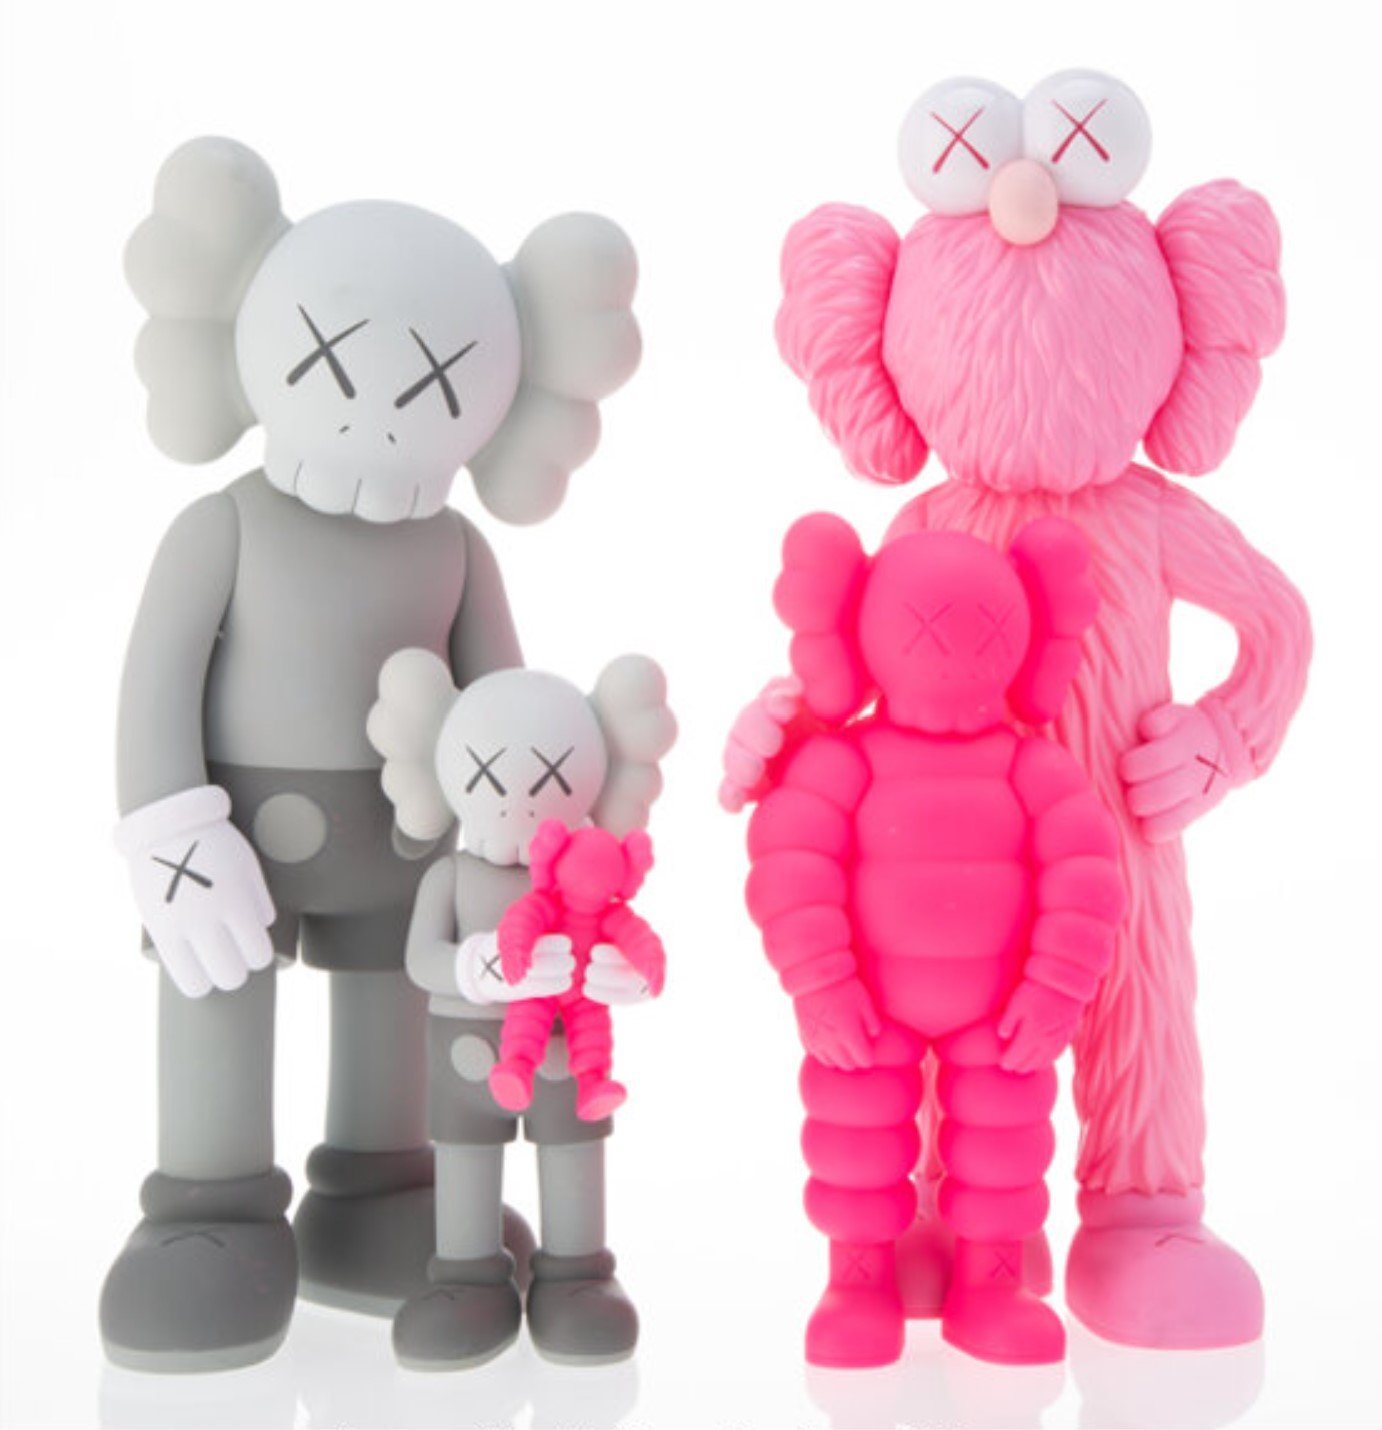 Holiday Indonesia Plush Charm Object Art by Kaws- Brian Donnelly – Sprayed  Paint Art Collection